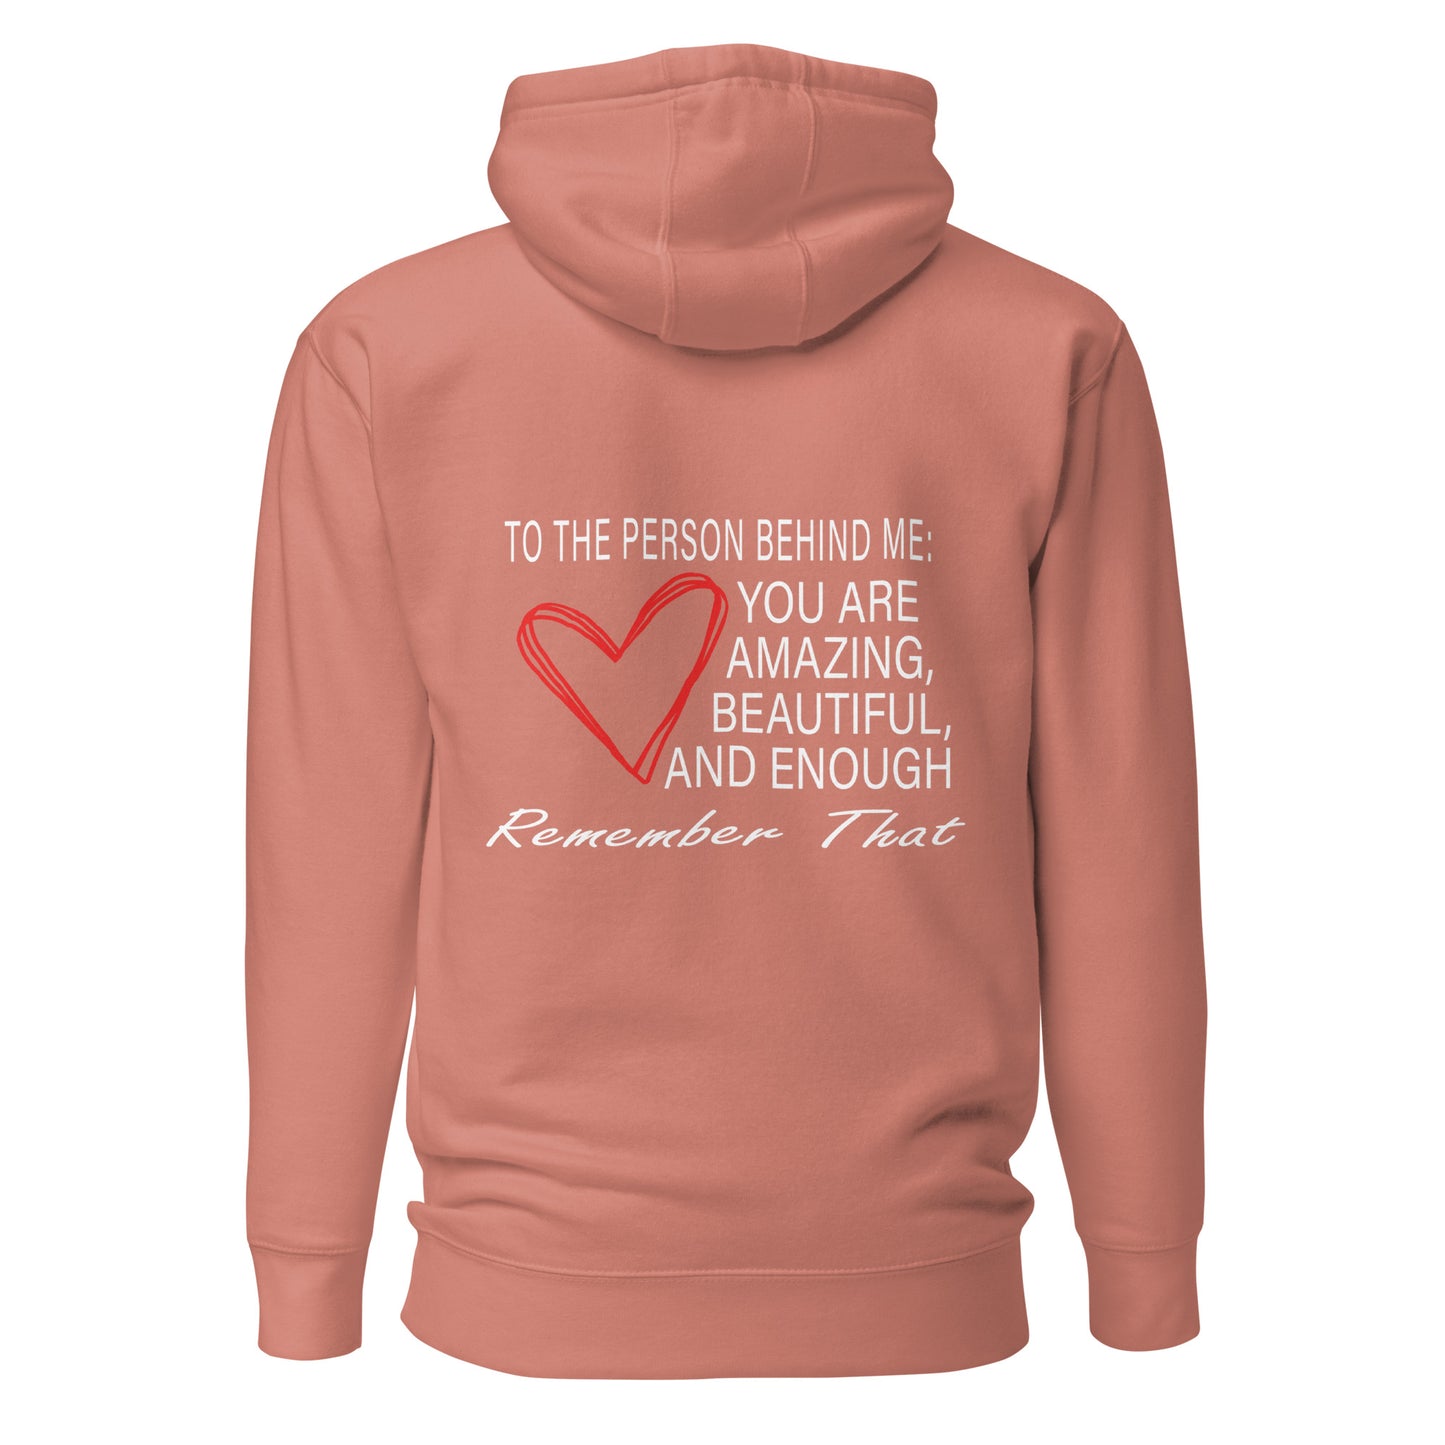 "To The Person Behind Me" Hoodie